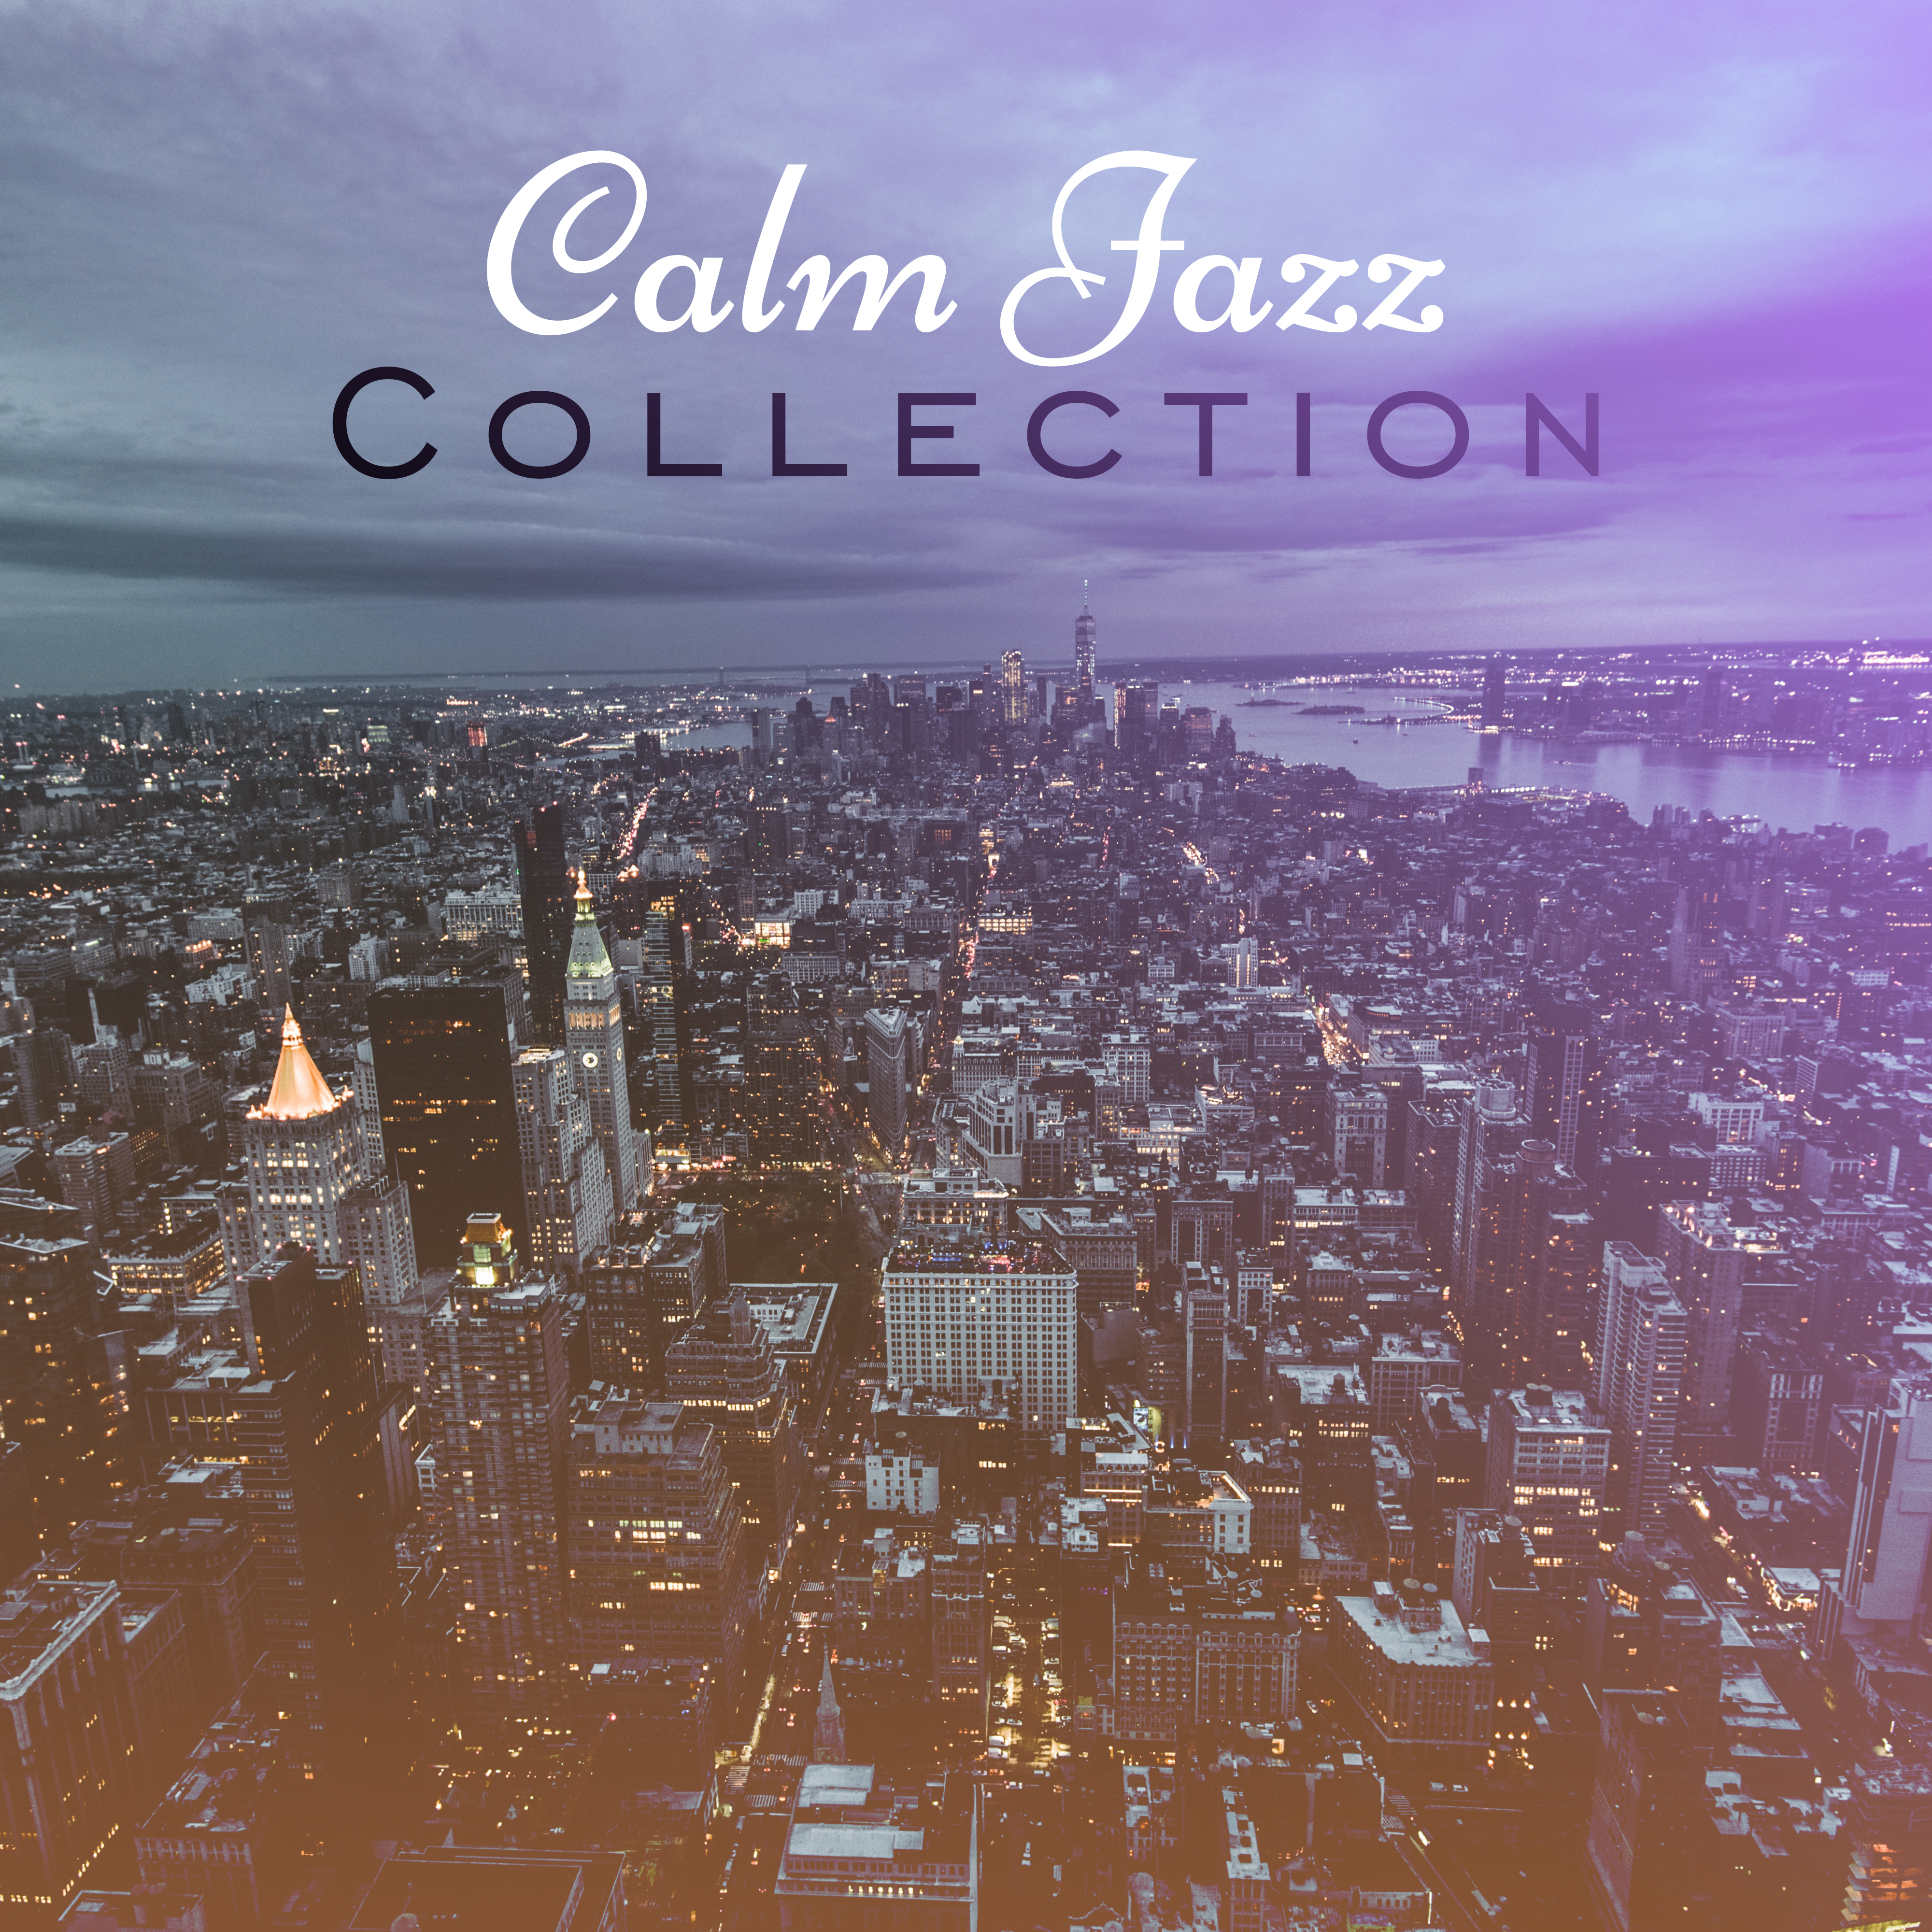 Calm Jazz Collection – Peaceful Jazz, Best Relaxing Songs to Rest, Soothing Sounds, Mellow Jazz